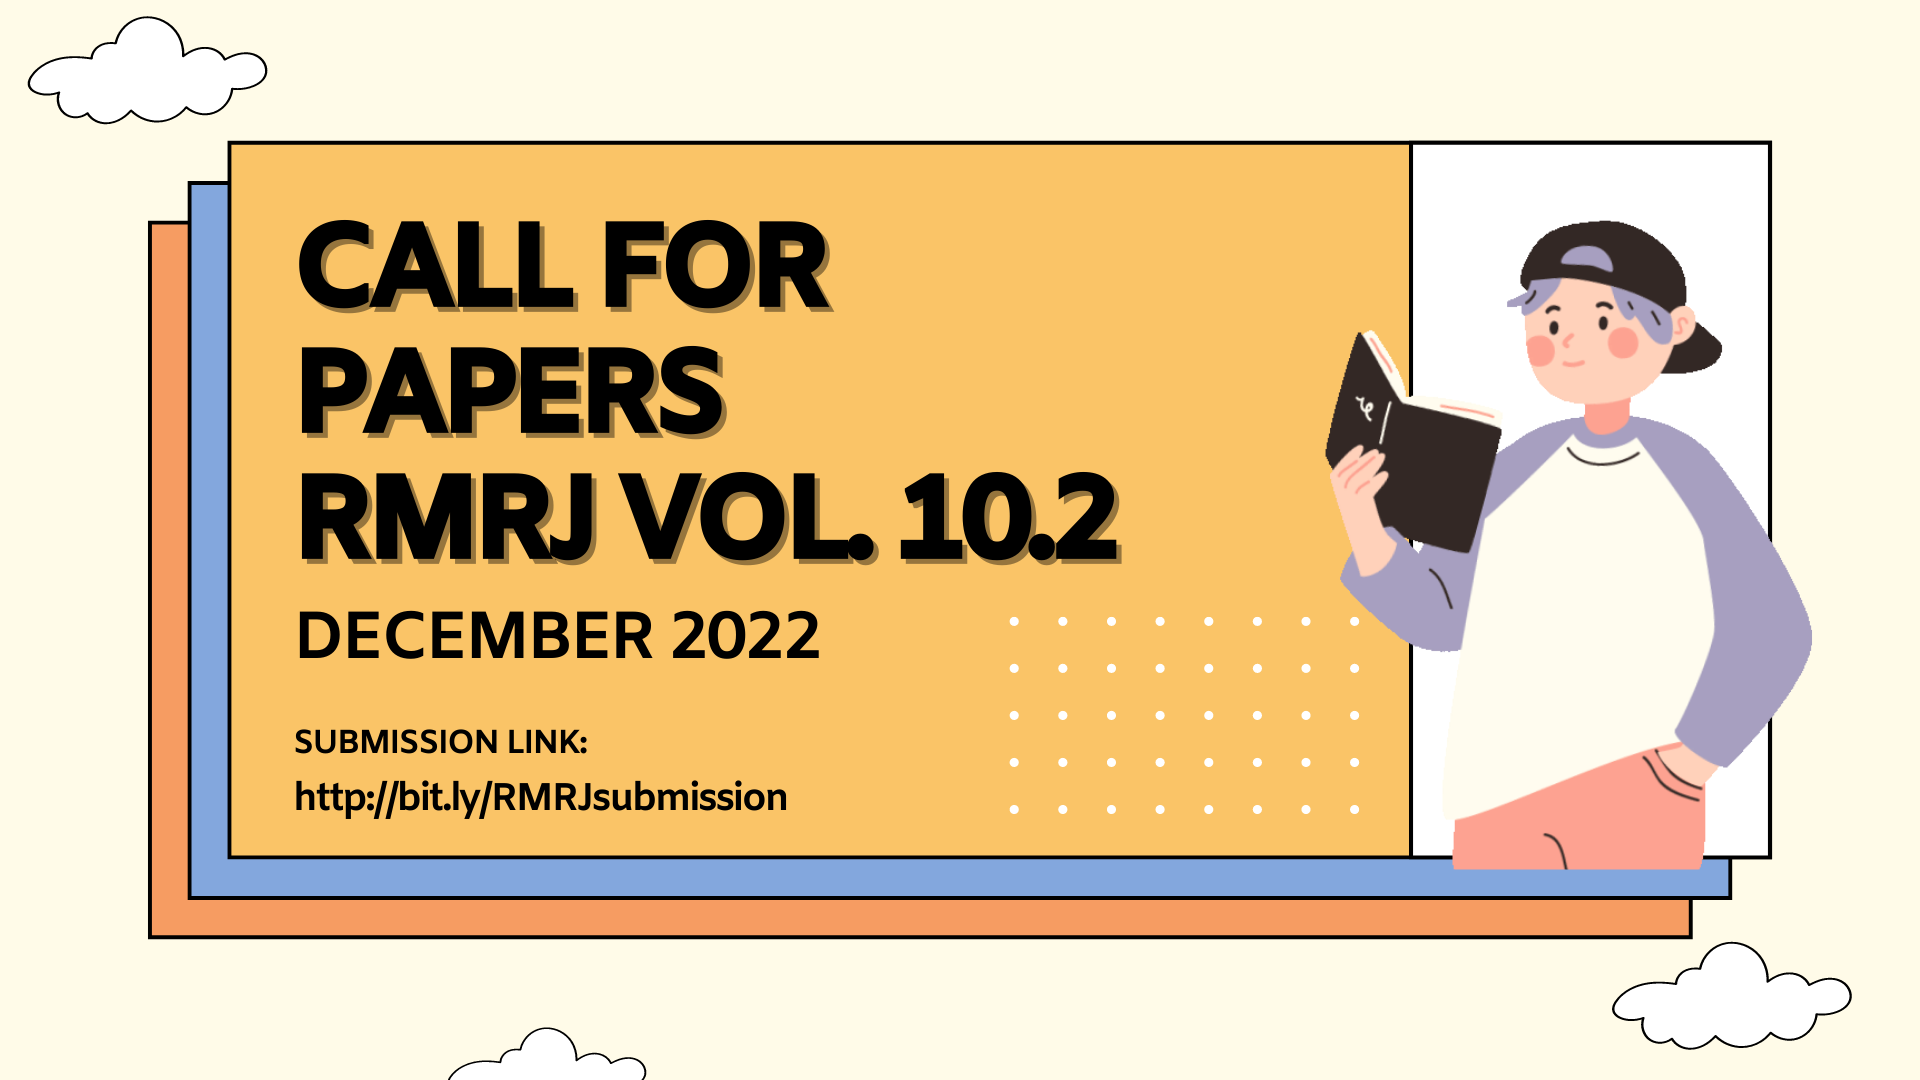 CALL_FOR_PAPERS_RMRJ_VOL._10_.2_1.png